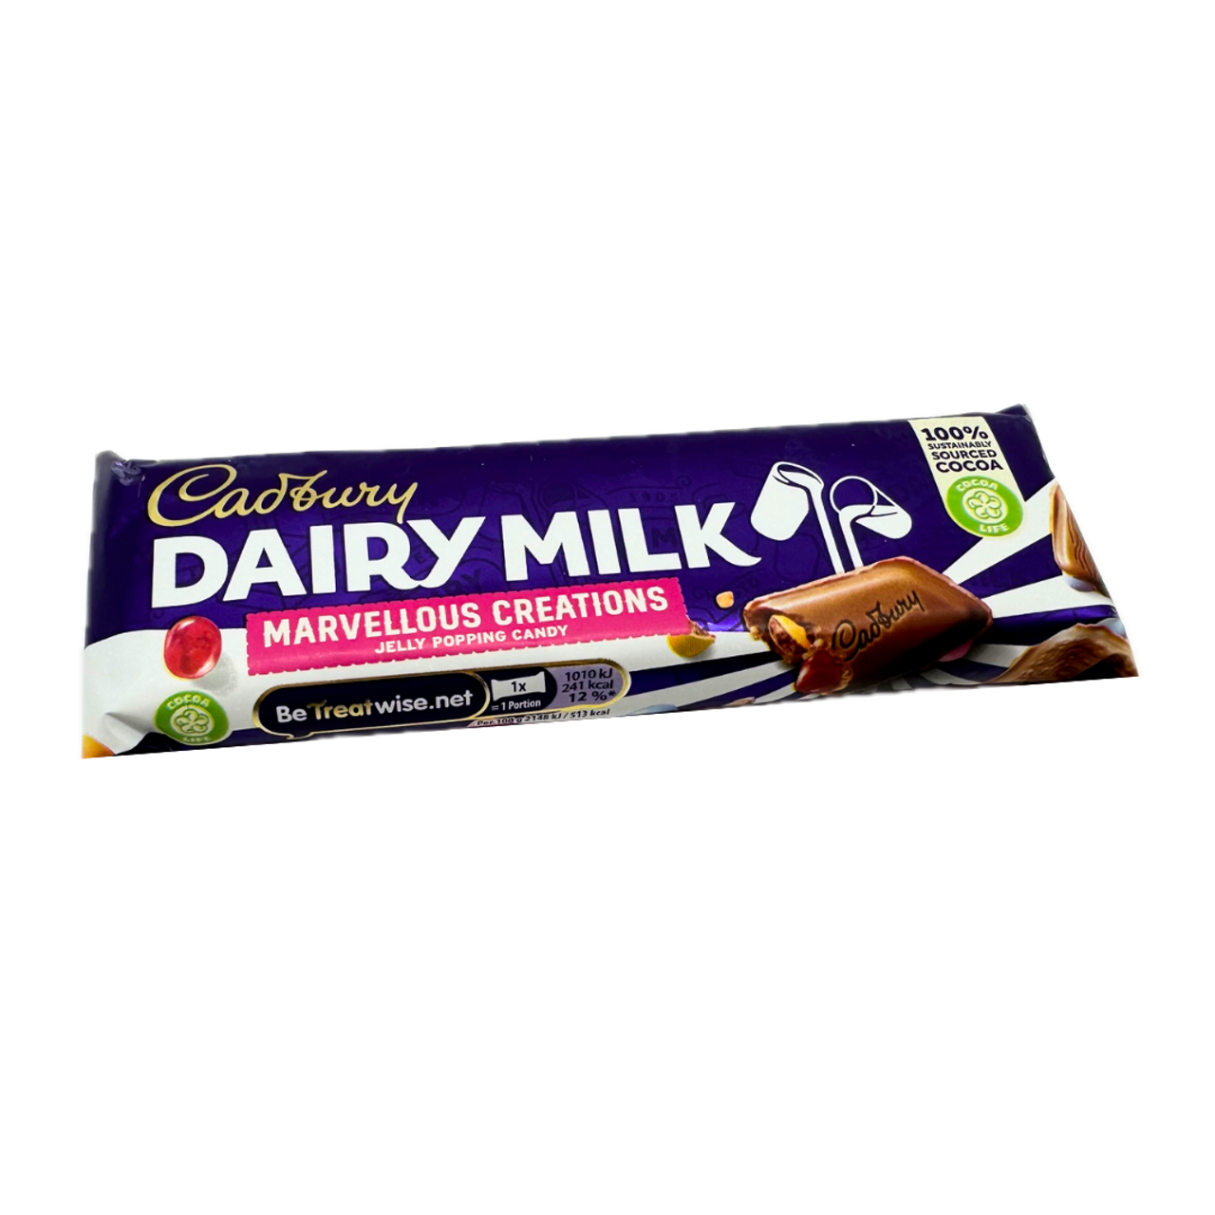 Cadbury Dairy Milk Marvelous Creations Jelly Popping Candy Chocolate Bar - 24ct